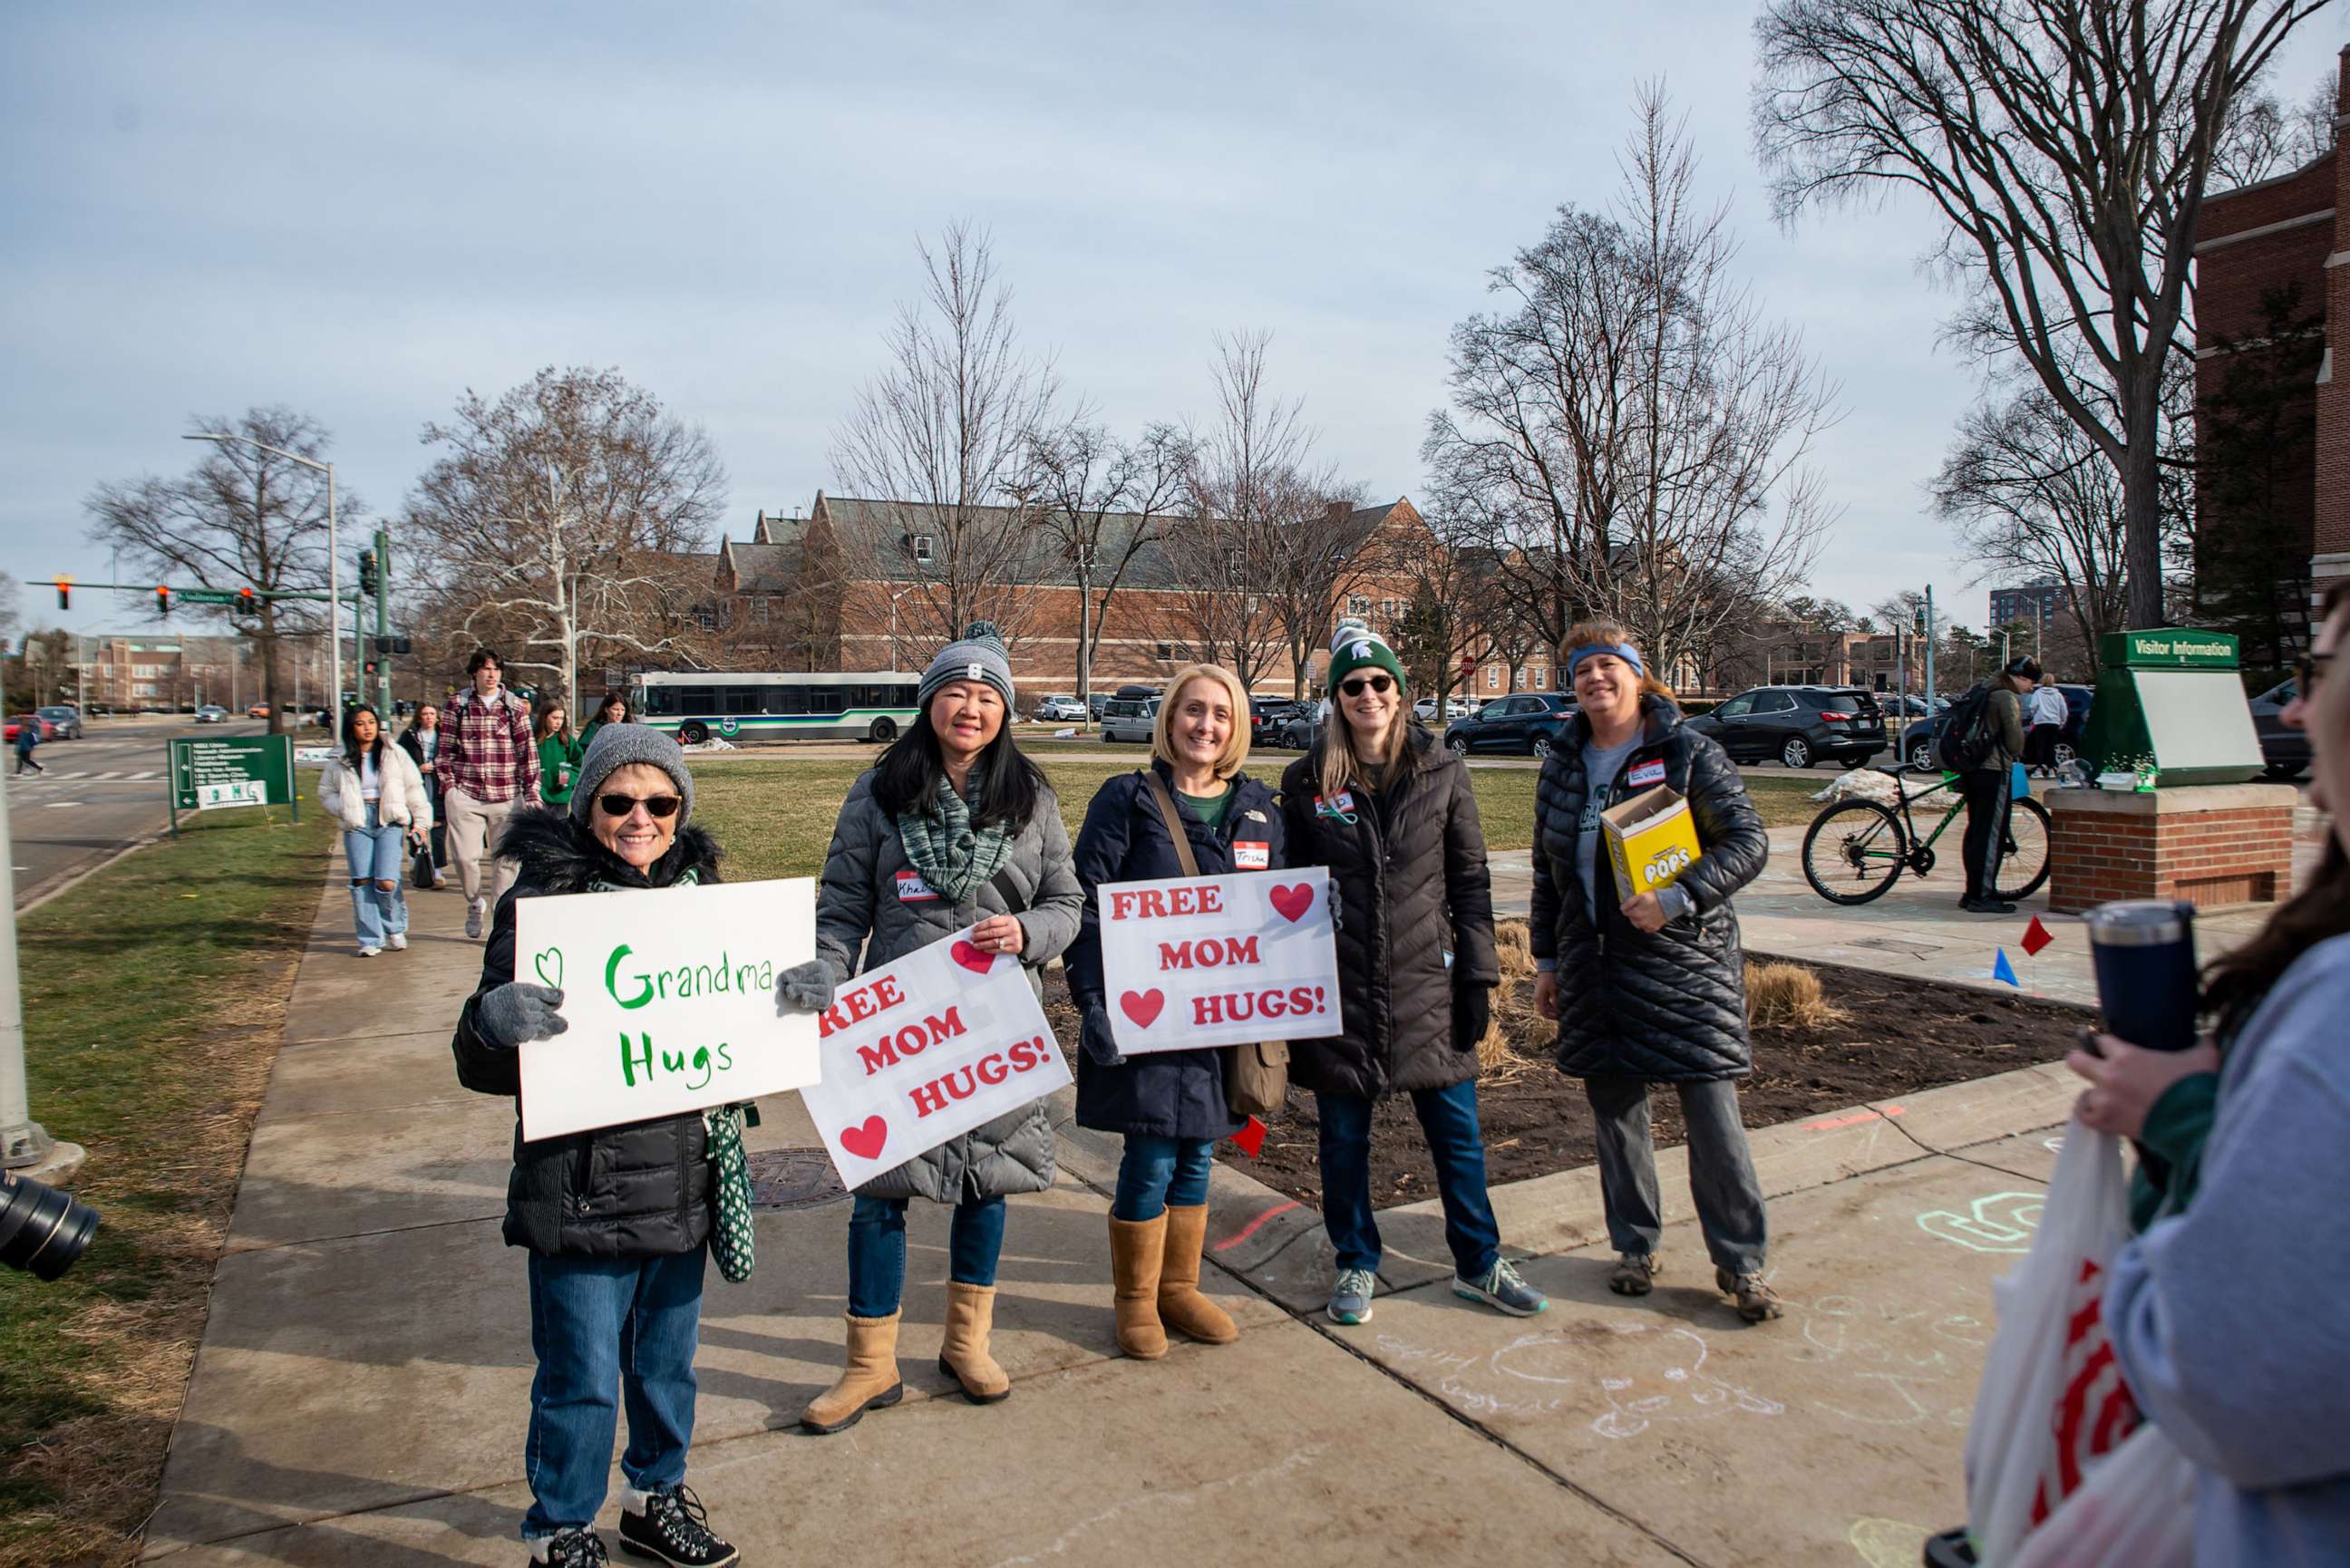 PHOTO: Parents of Michigan State University students organized an event to welcome students back to school on Feb. 20, 2023, following a deadly shooting on the campus.